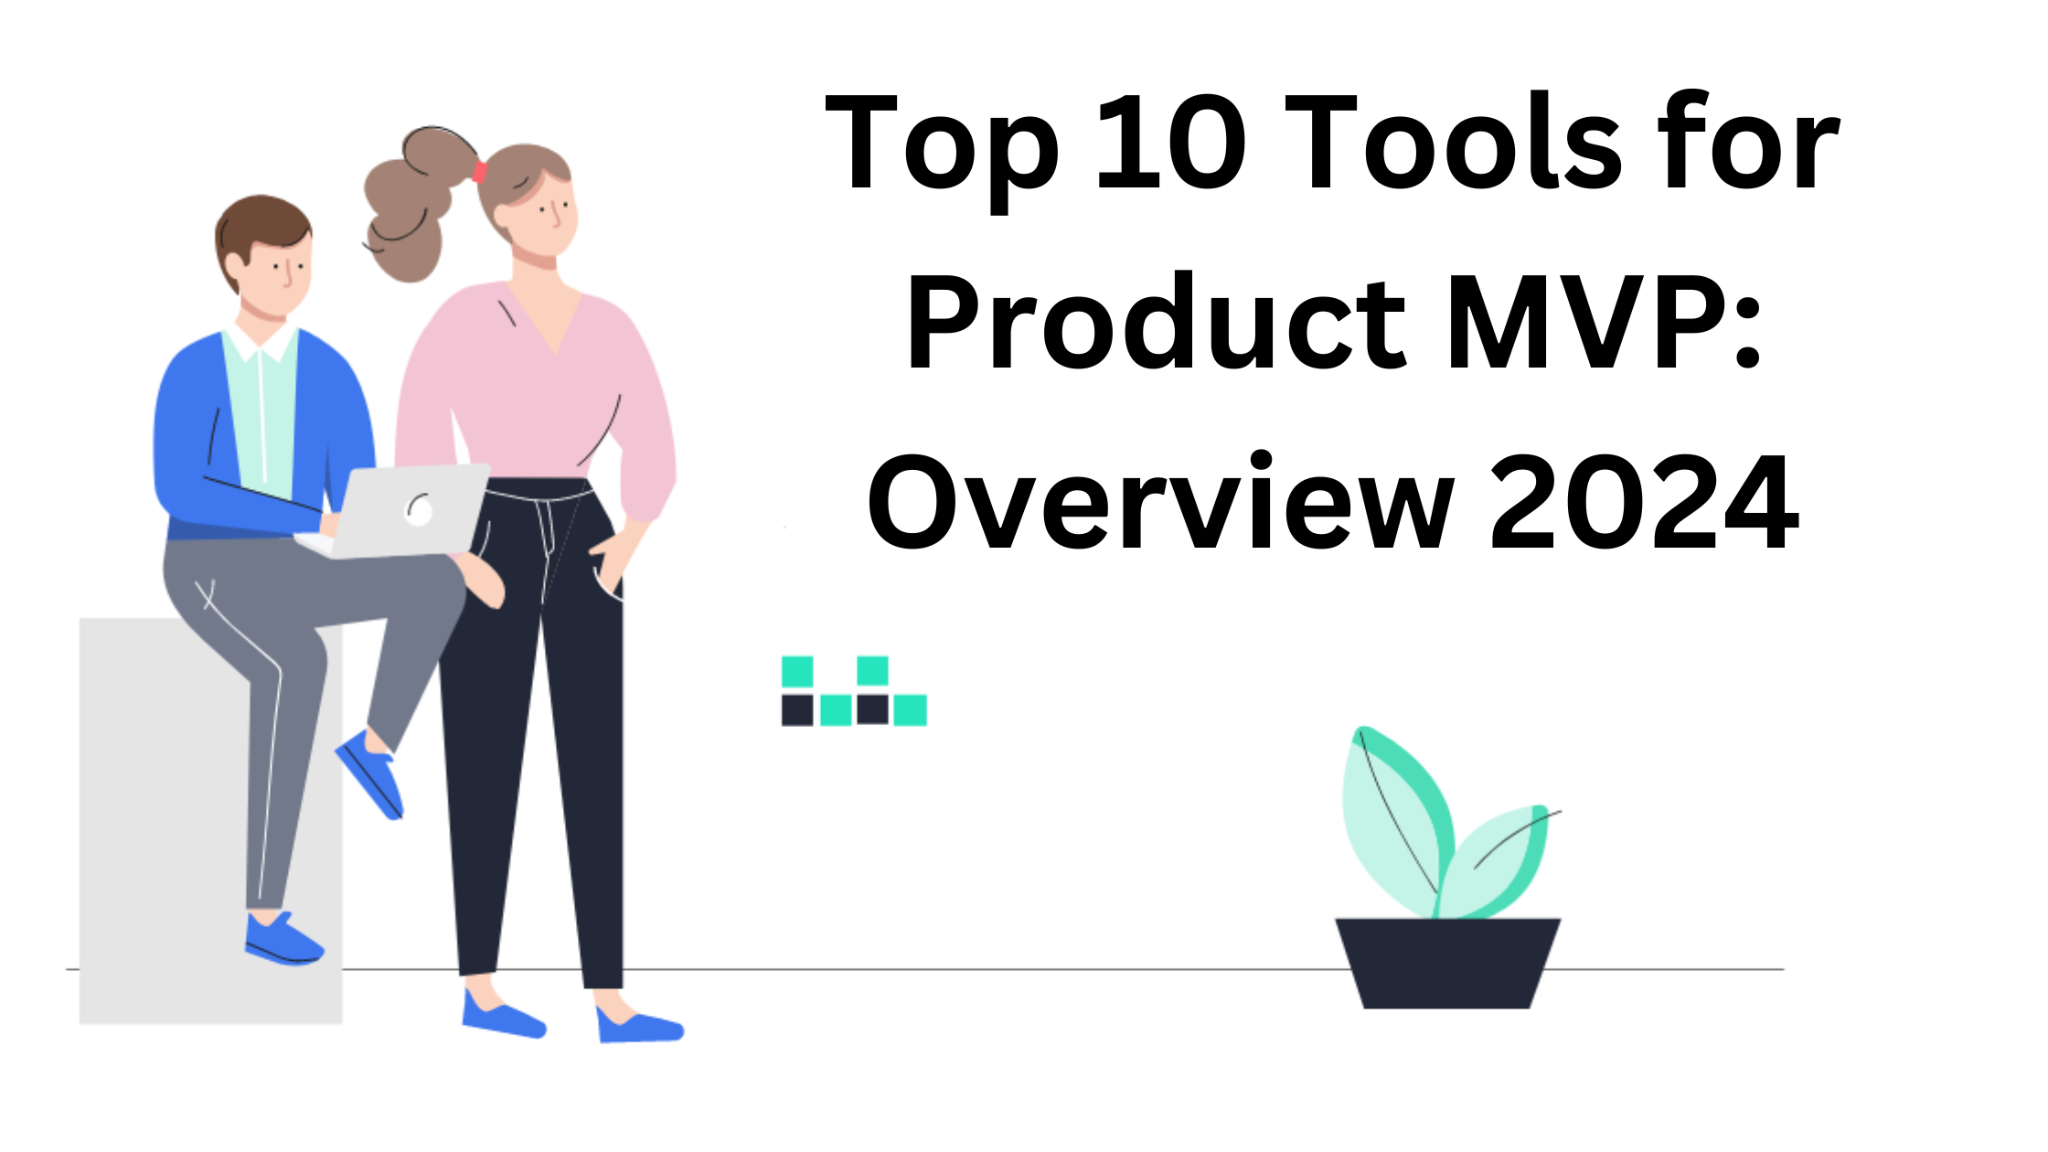 Top 10 Tools for Product MVP: Overview 2024